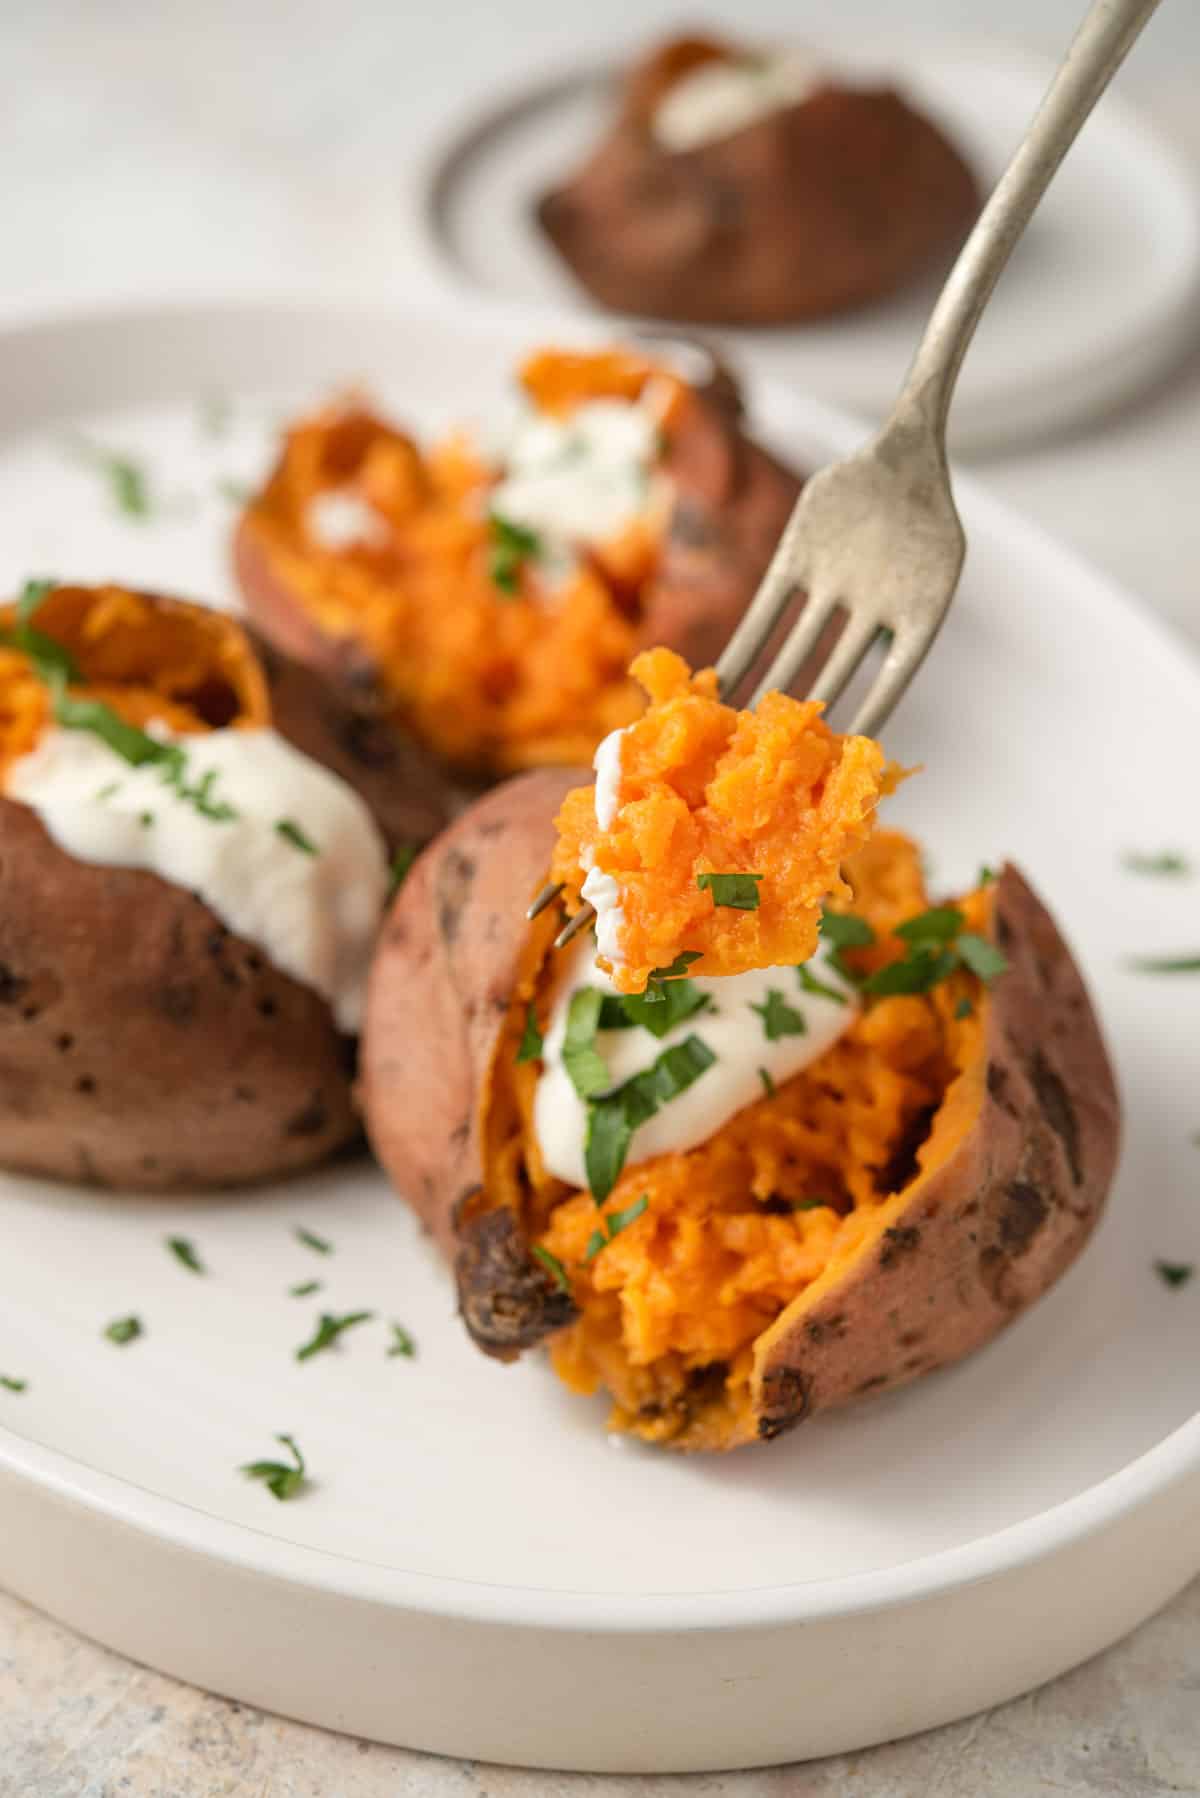 A fork picking up a bite of sweet potato